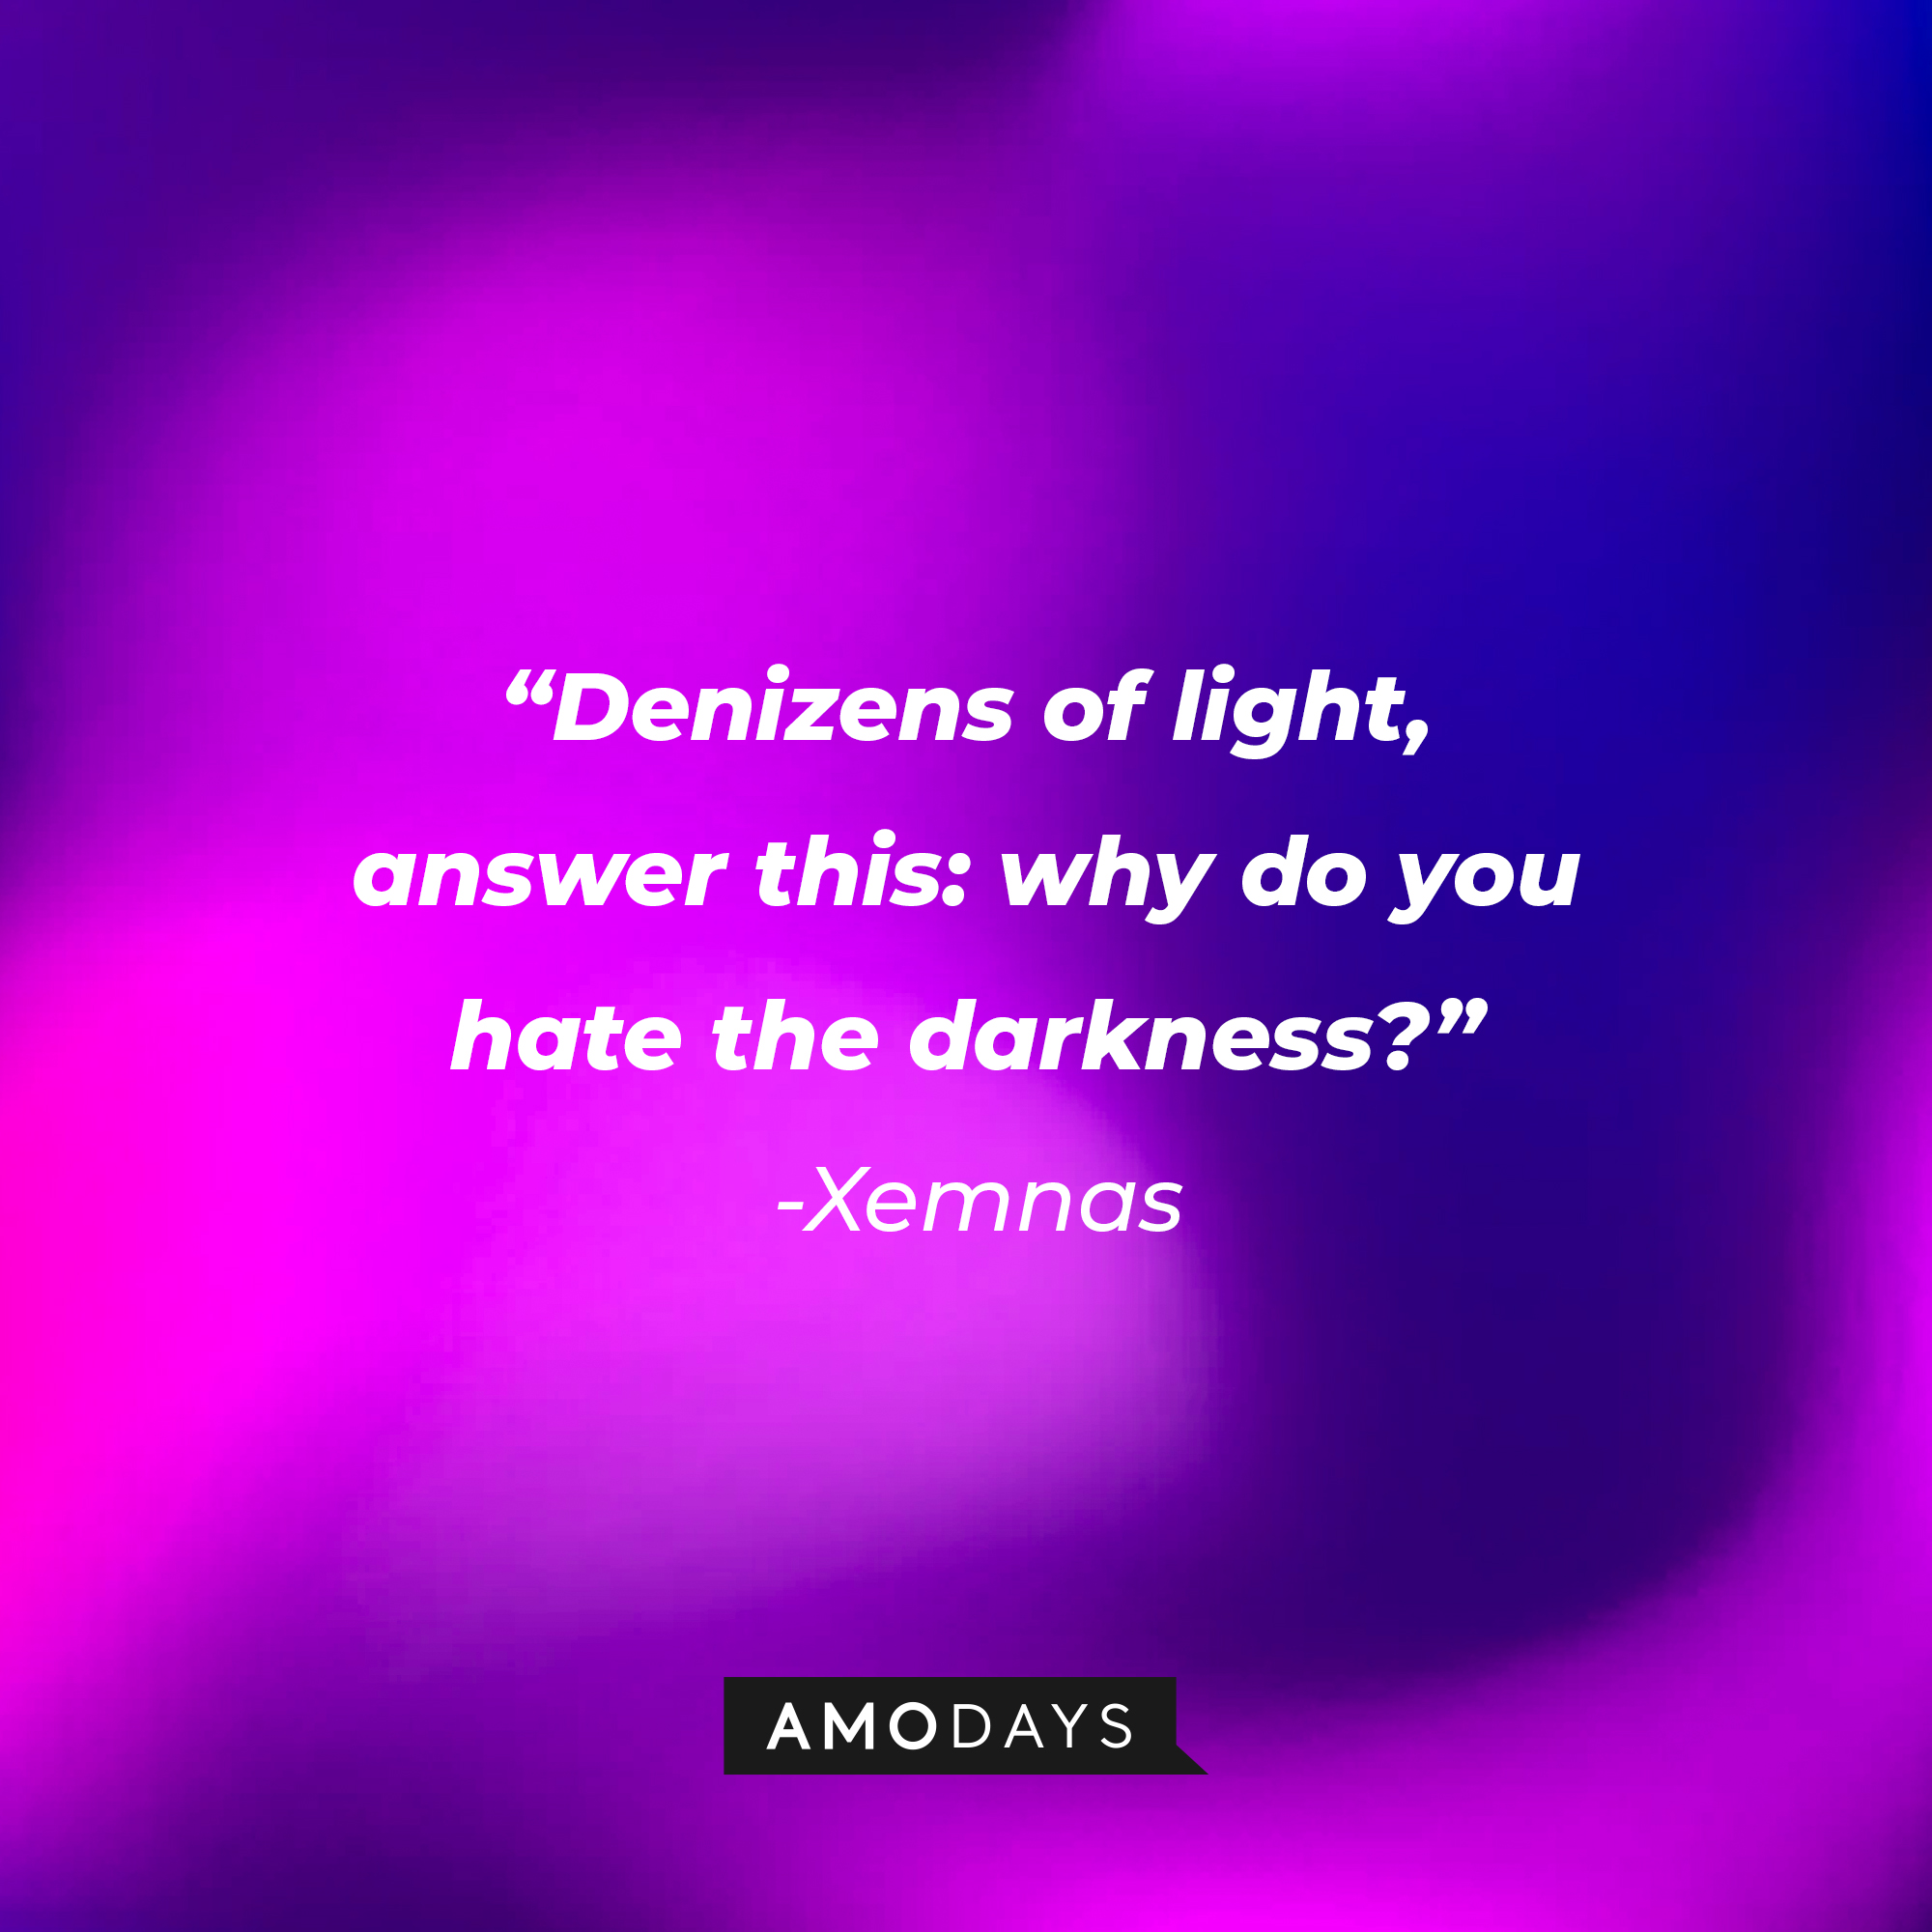 Xenmas’ quote: “Denizens of light, answer this: why do you hate the darkness?” | Source: AmoDays